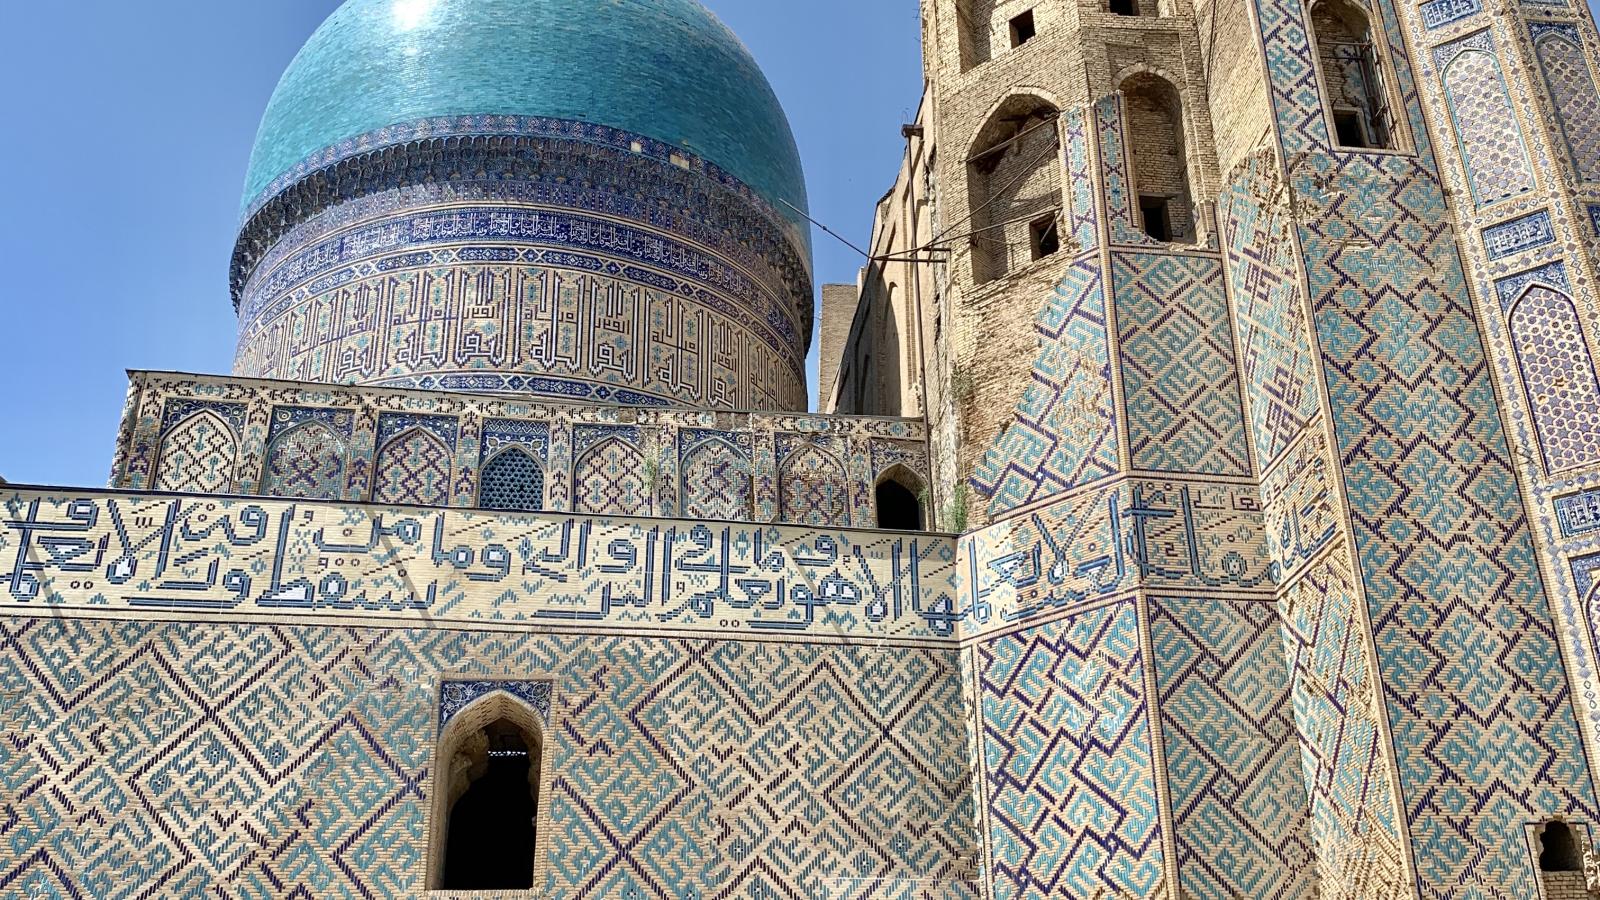 Bibi Khanym mosque- located in Samarkand, made by Tamerlane in the early 15th century.